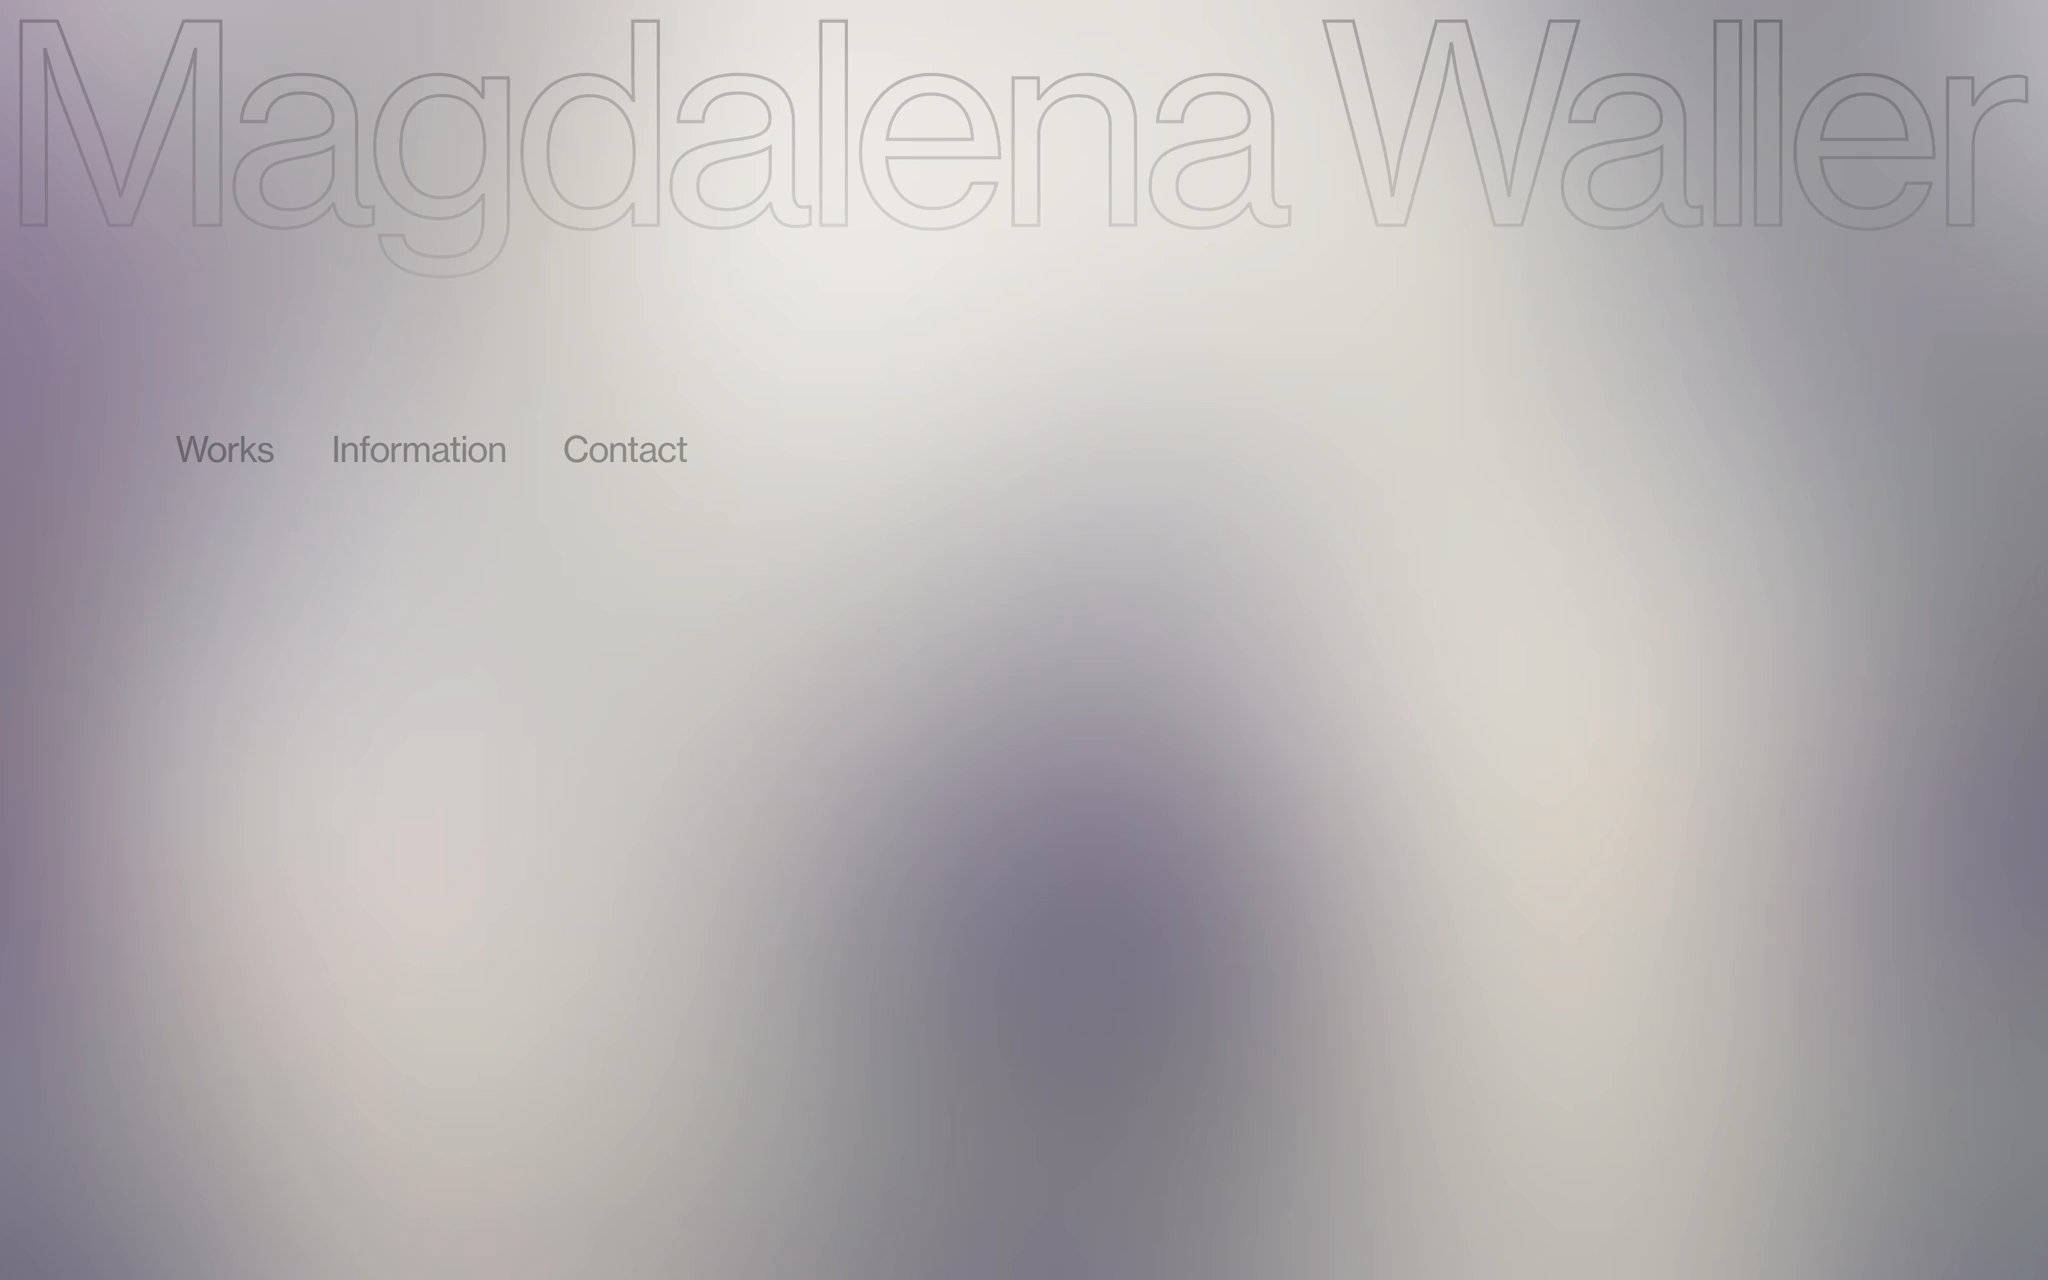 Screenshot of the Magdalena Waller website showing a large logo headline on a light red background